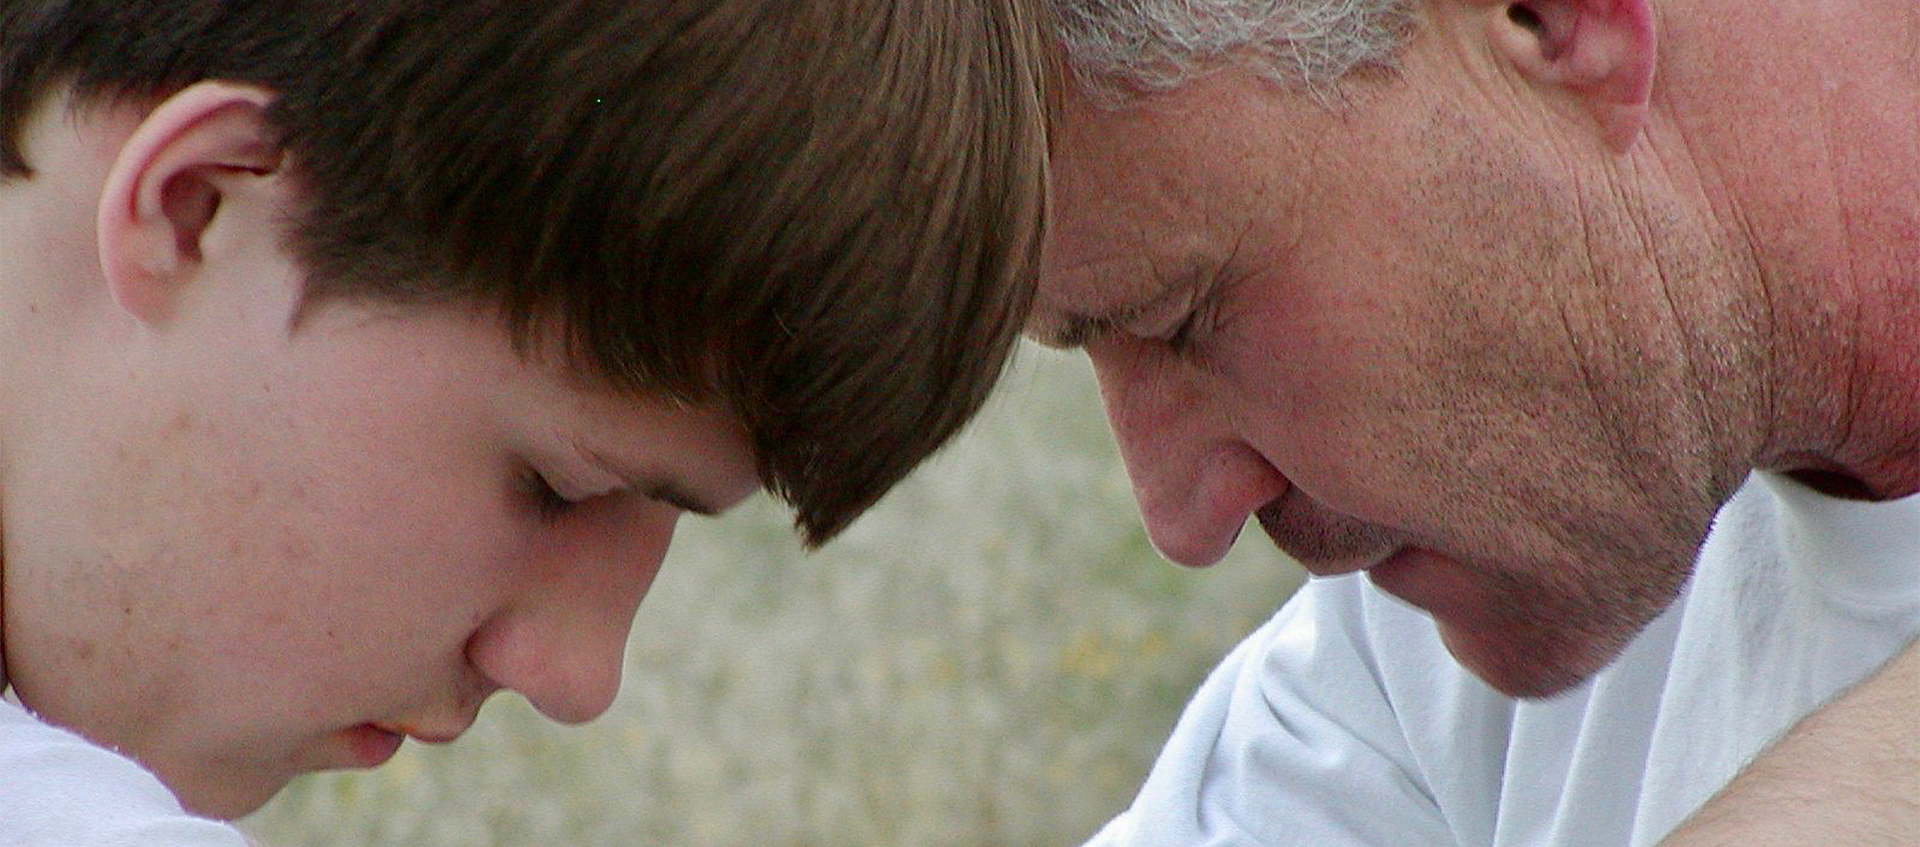 A father and child, Ryan and Rob Robertson, pray together touching foreheads.